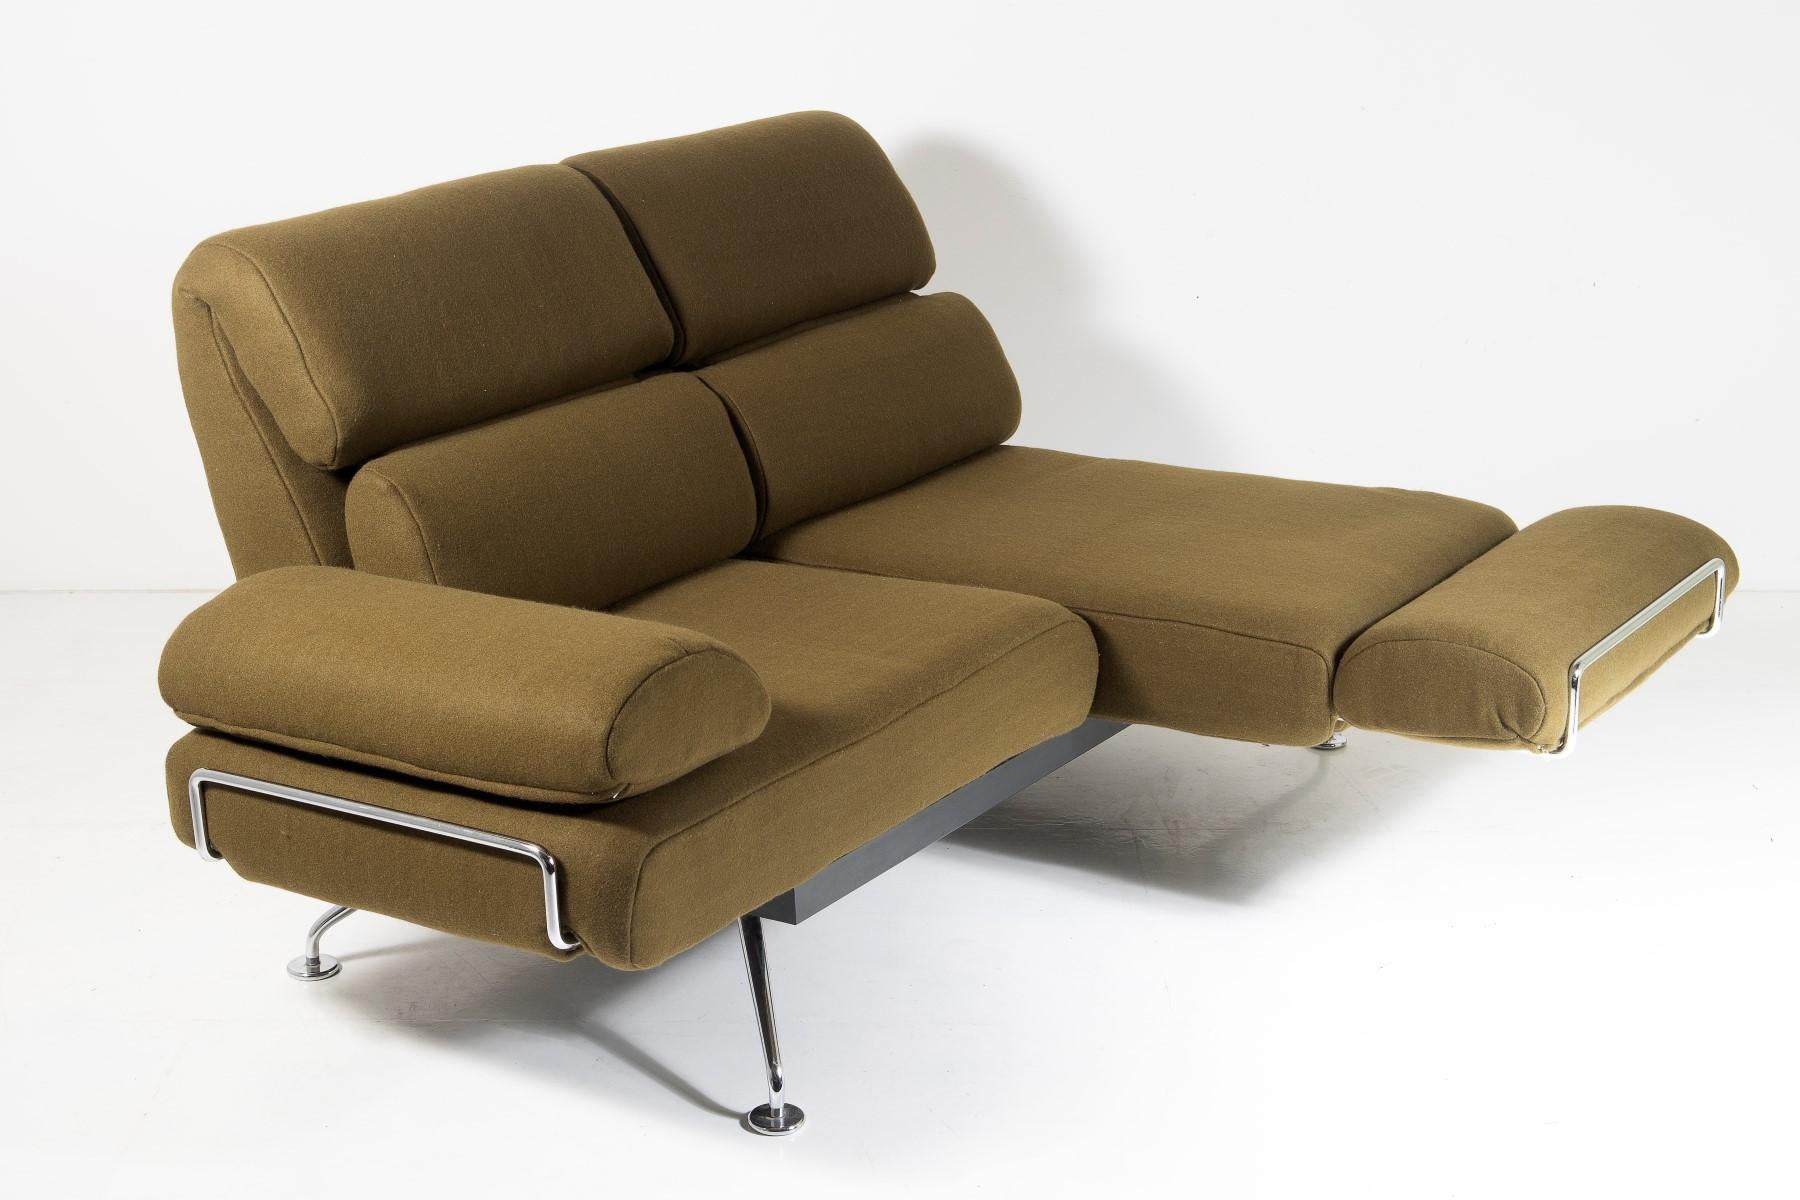 1980s Two Seater Day Bed Recliner Sofa in Olive Green - De-Sede Ds 470 Couch 1